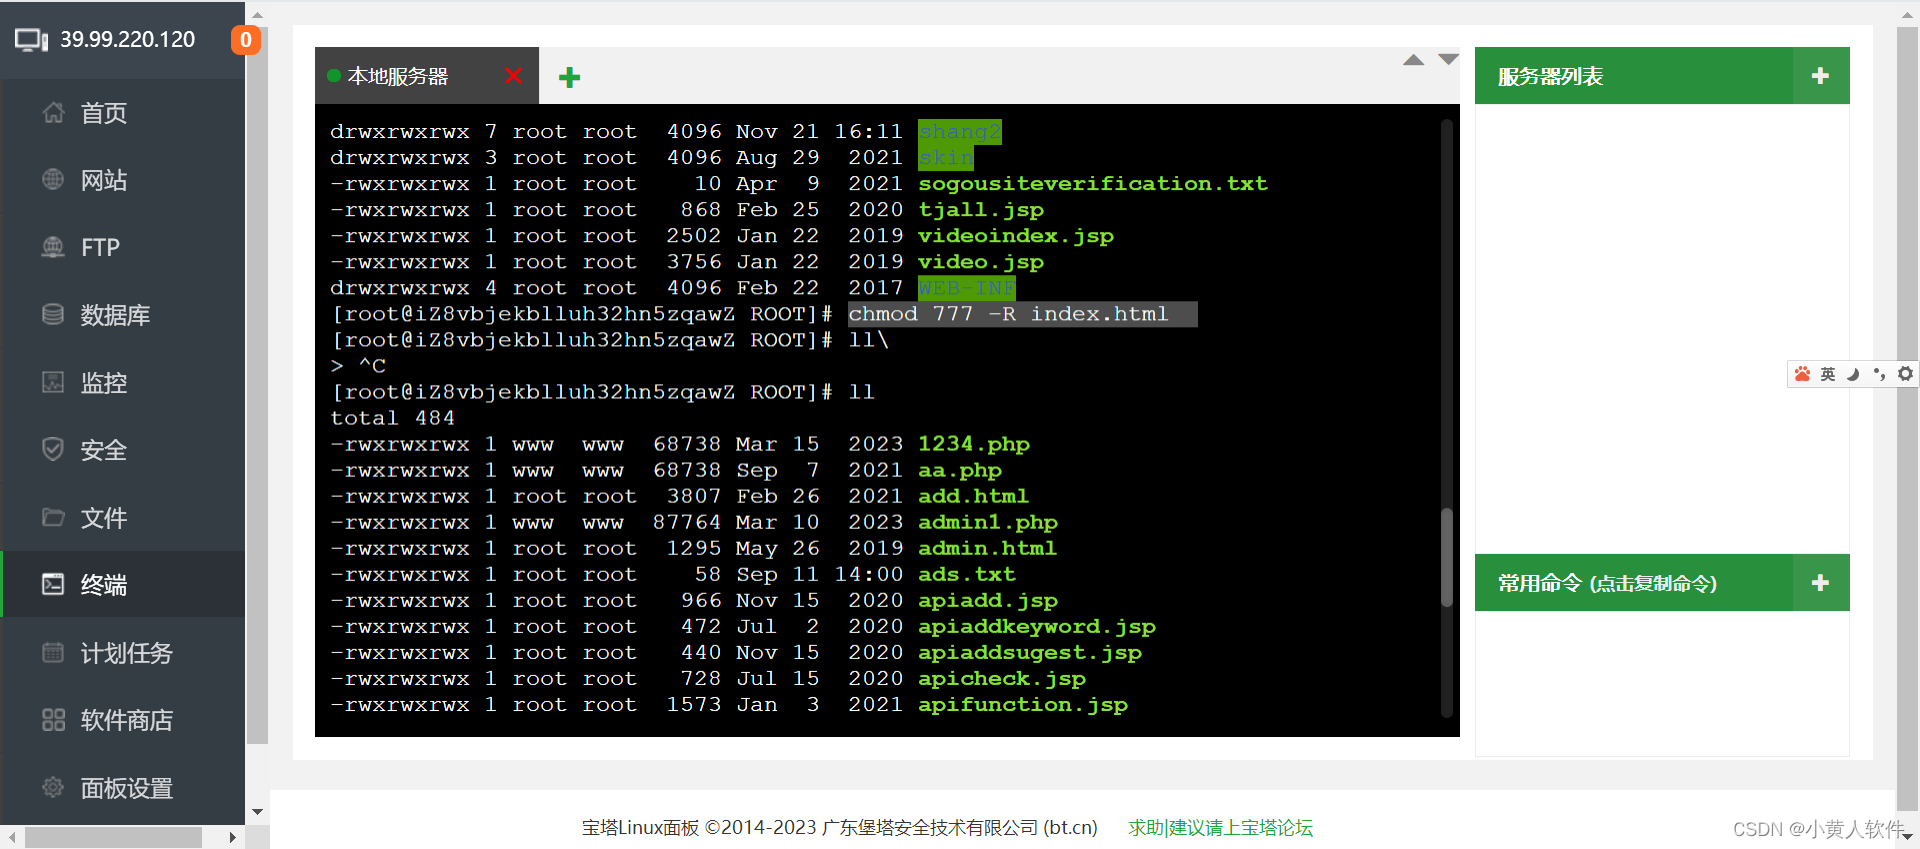 cc linux用root用户执行chmod 777 -R ./提示 Operation not permitted怎么办？